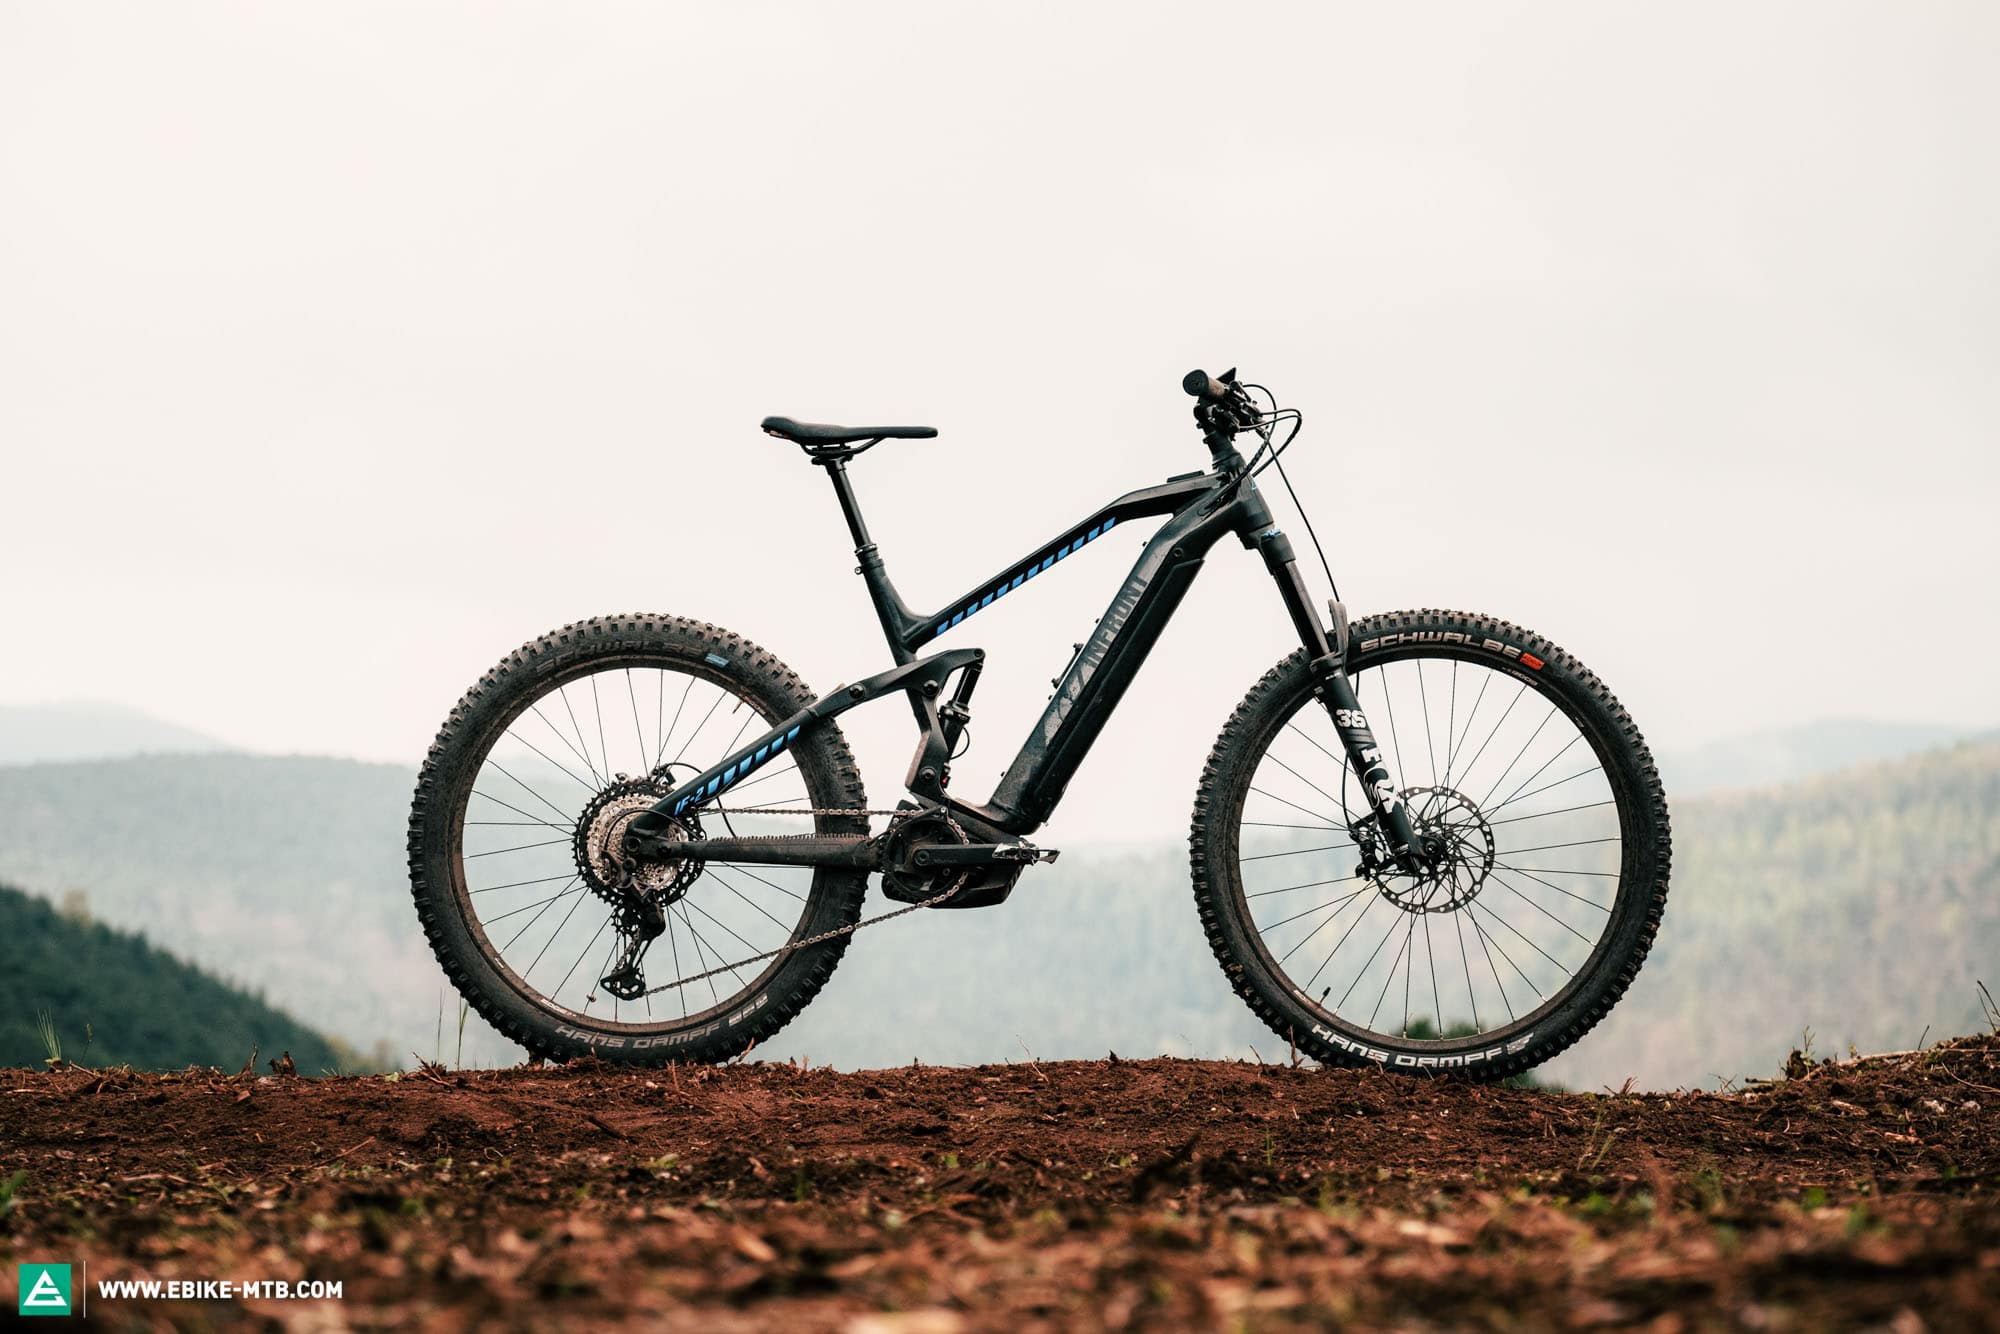 Infront-IF-2-Fully-bestes-budget-guenstiges-e-mtb-2021-test-review-18